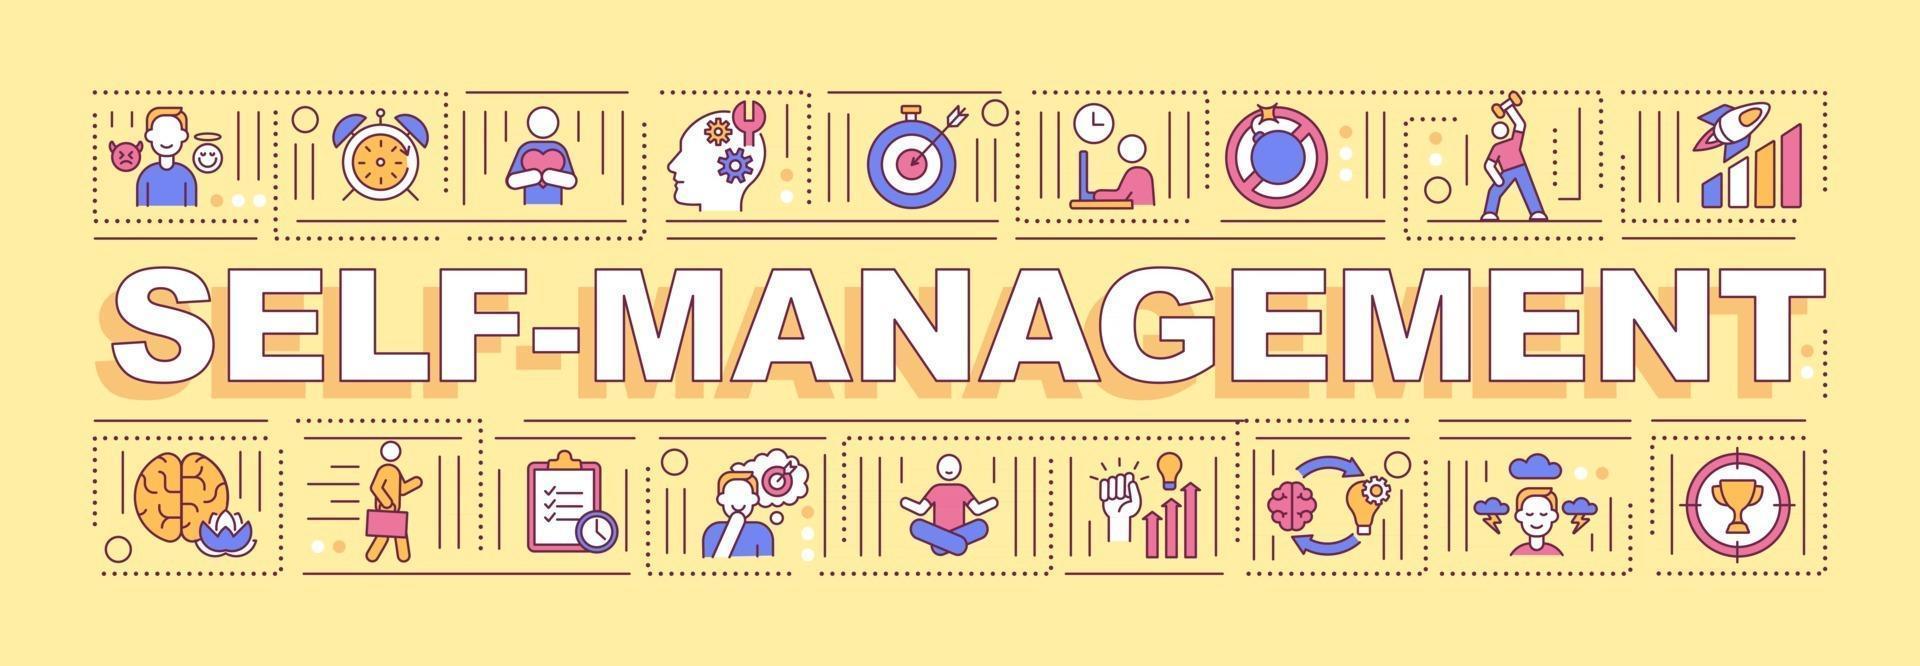 Self management word concepts banner vector